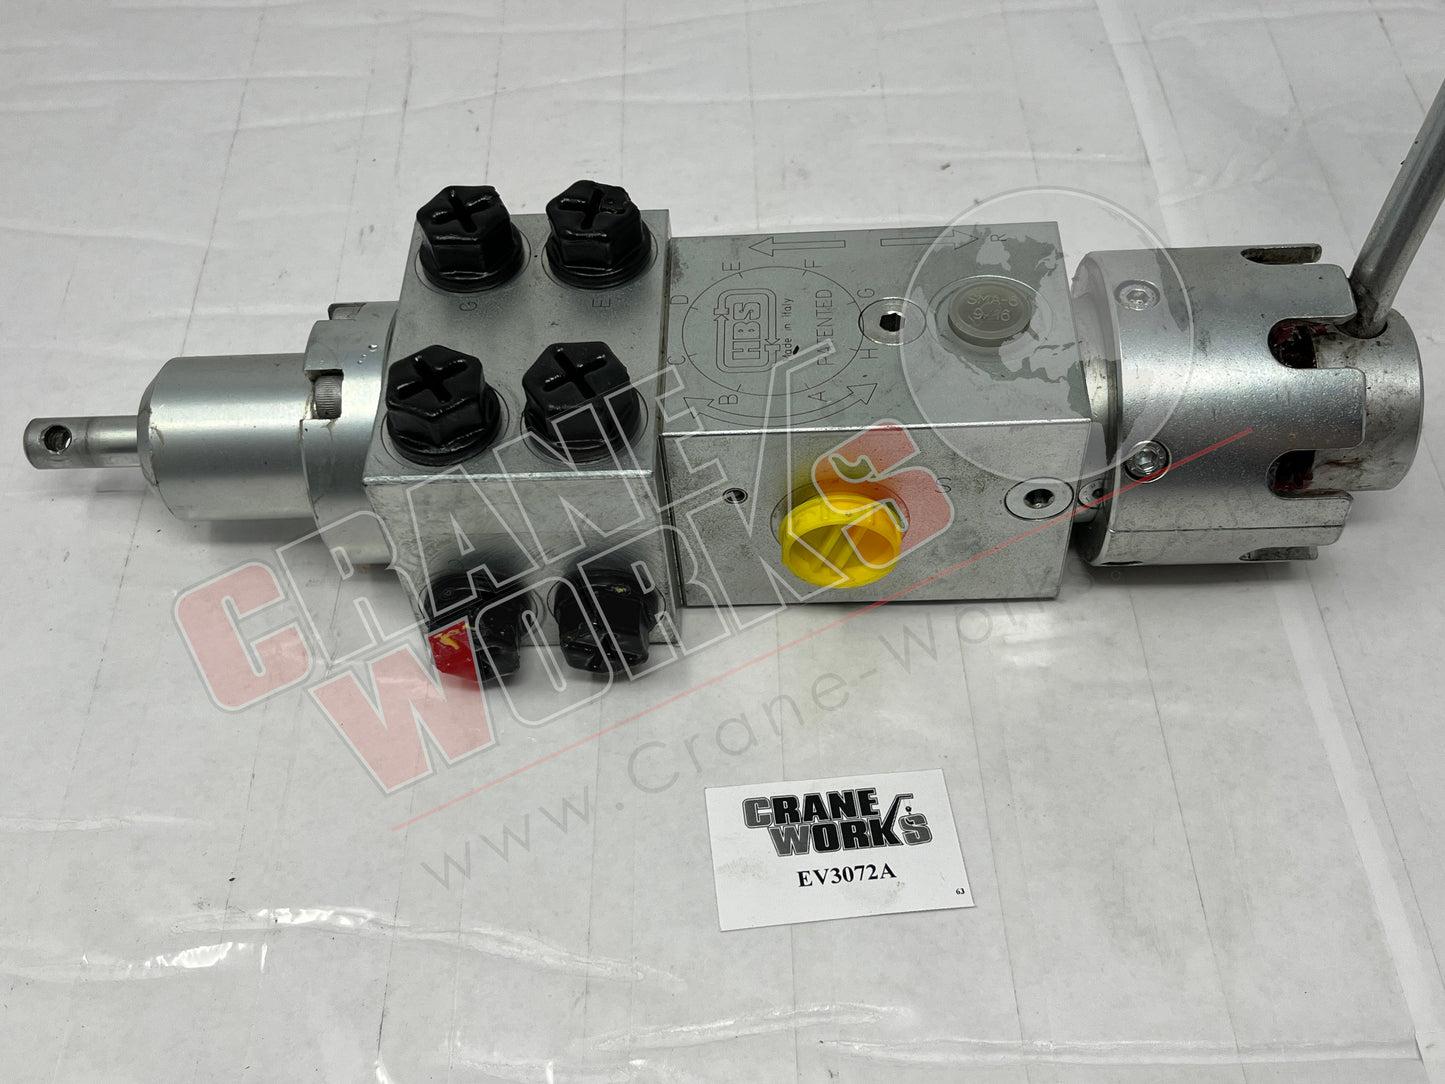 Picture of Outrigger Control Valve, angle 3